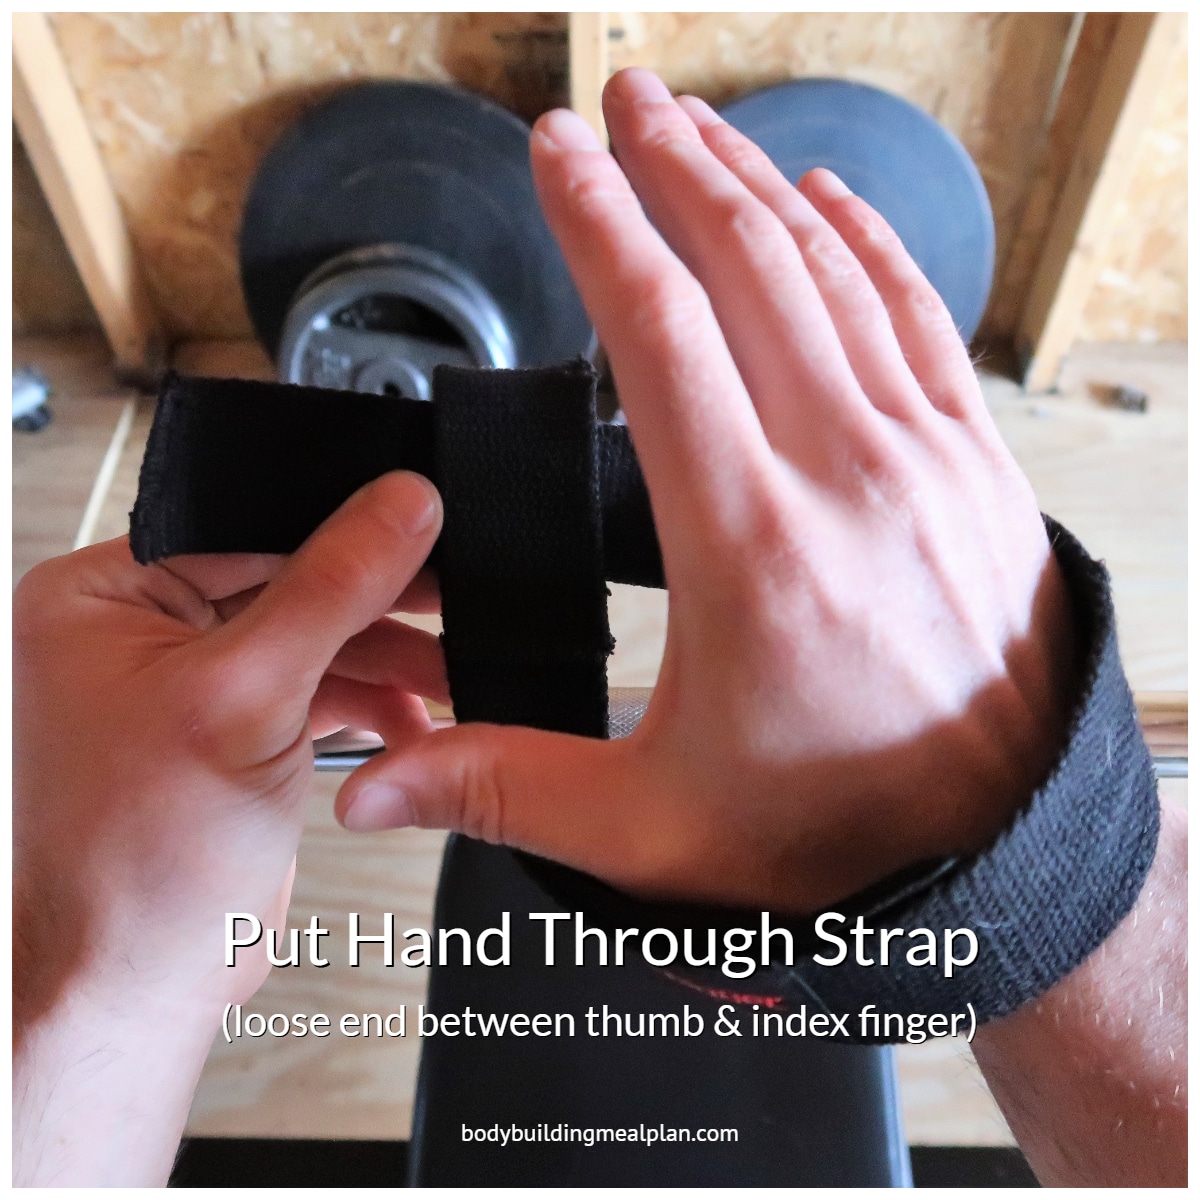 How To Use Lifting Straps Hand Through